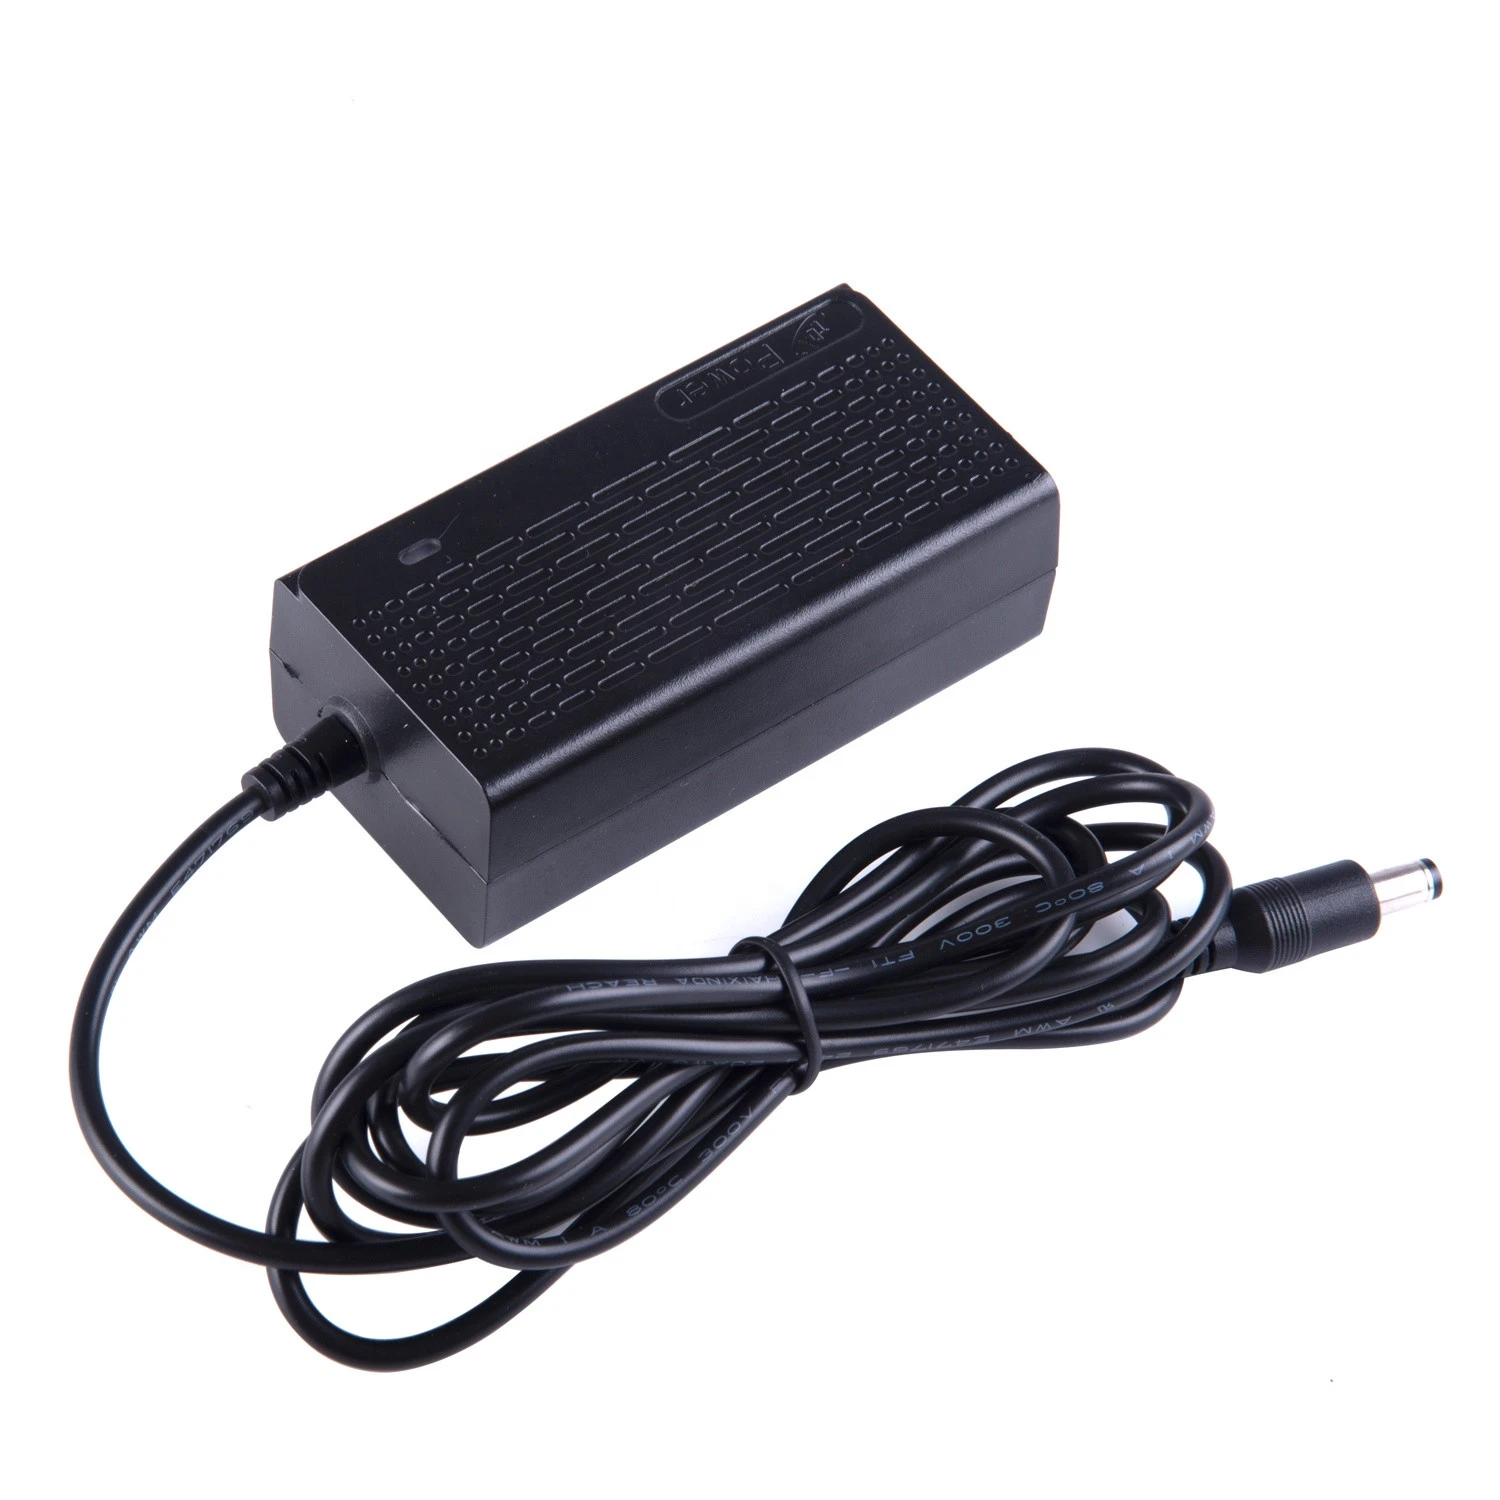 AC to DC Switching Power Adapter 6V 4A 24W With CE GS ROHS SAA US FCC ETL Certification 6V 4000mA Power Supply